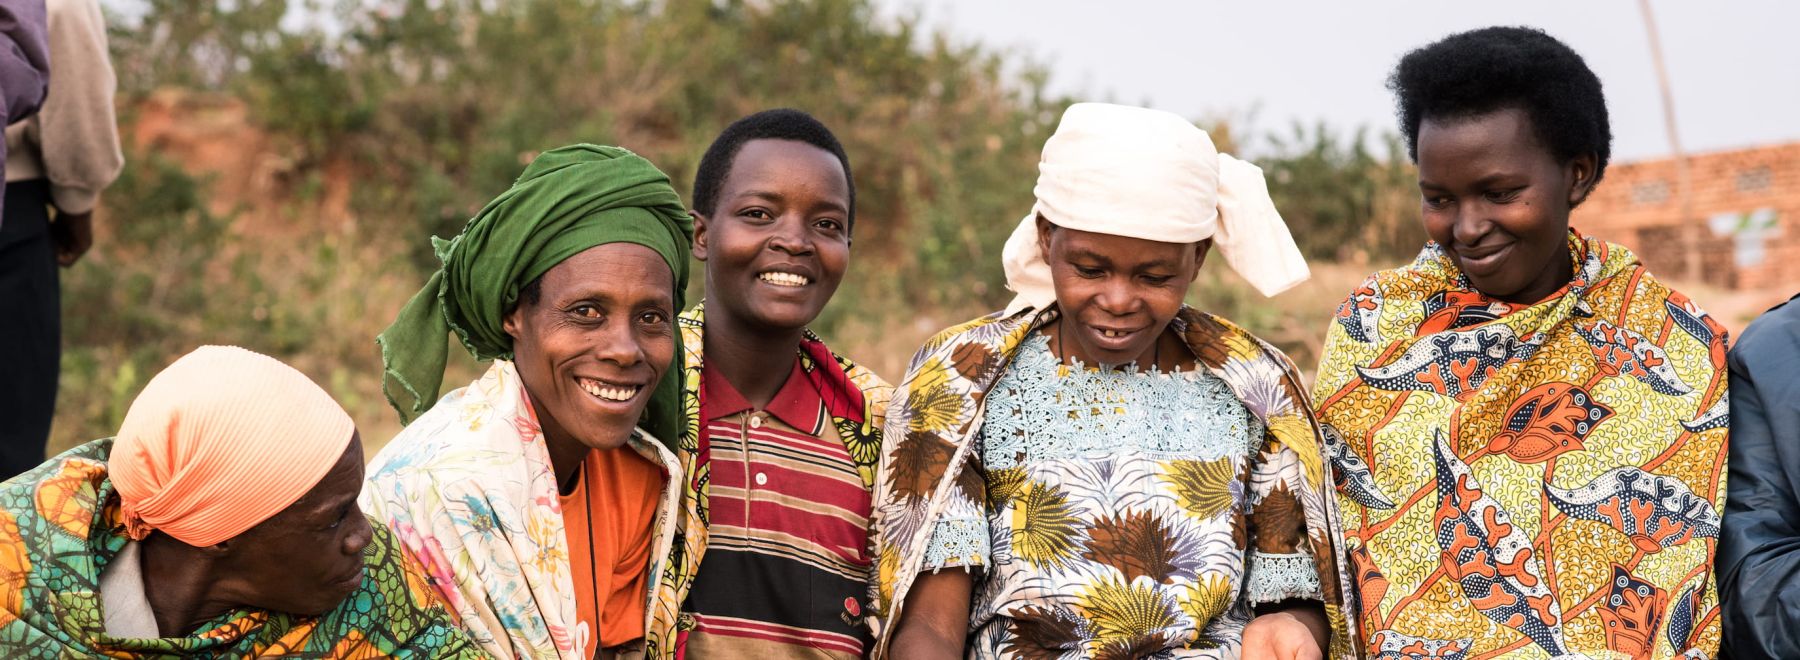 Farmers in Burundi attend a group meeting - here they're smiling at the camera